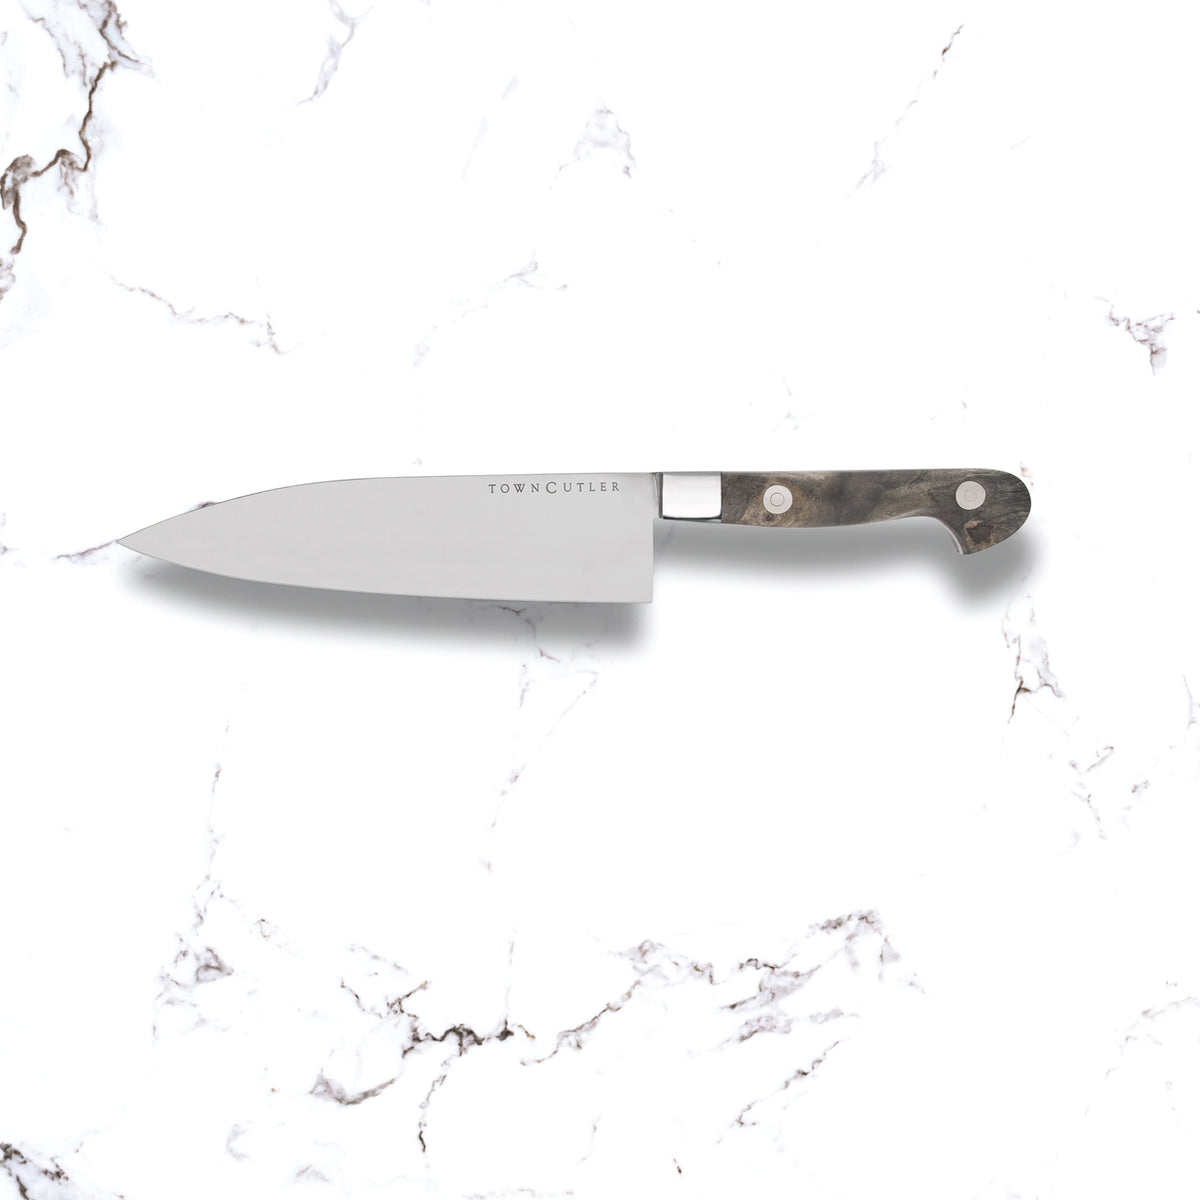 GLOBAL KNIVES/SCANPAN Archives - Cutler's